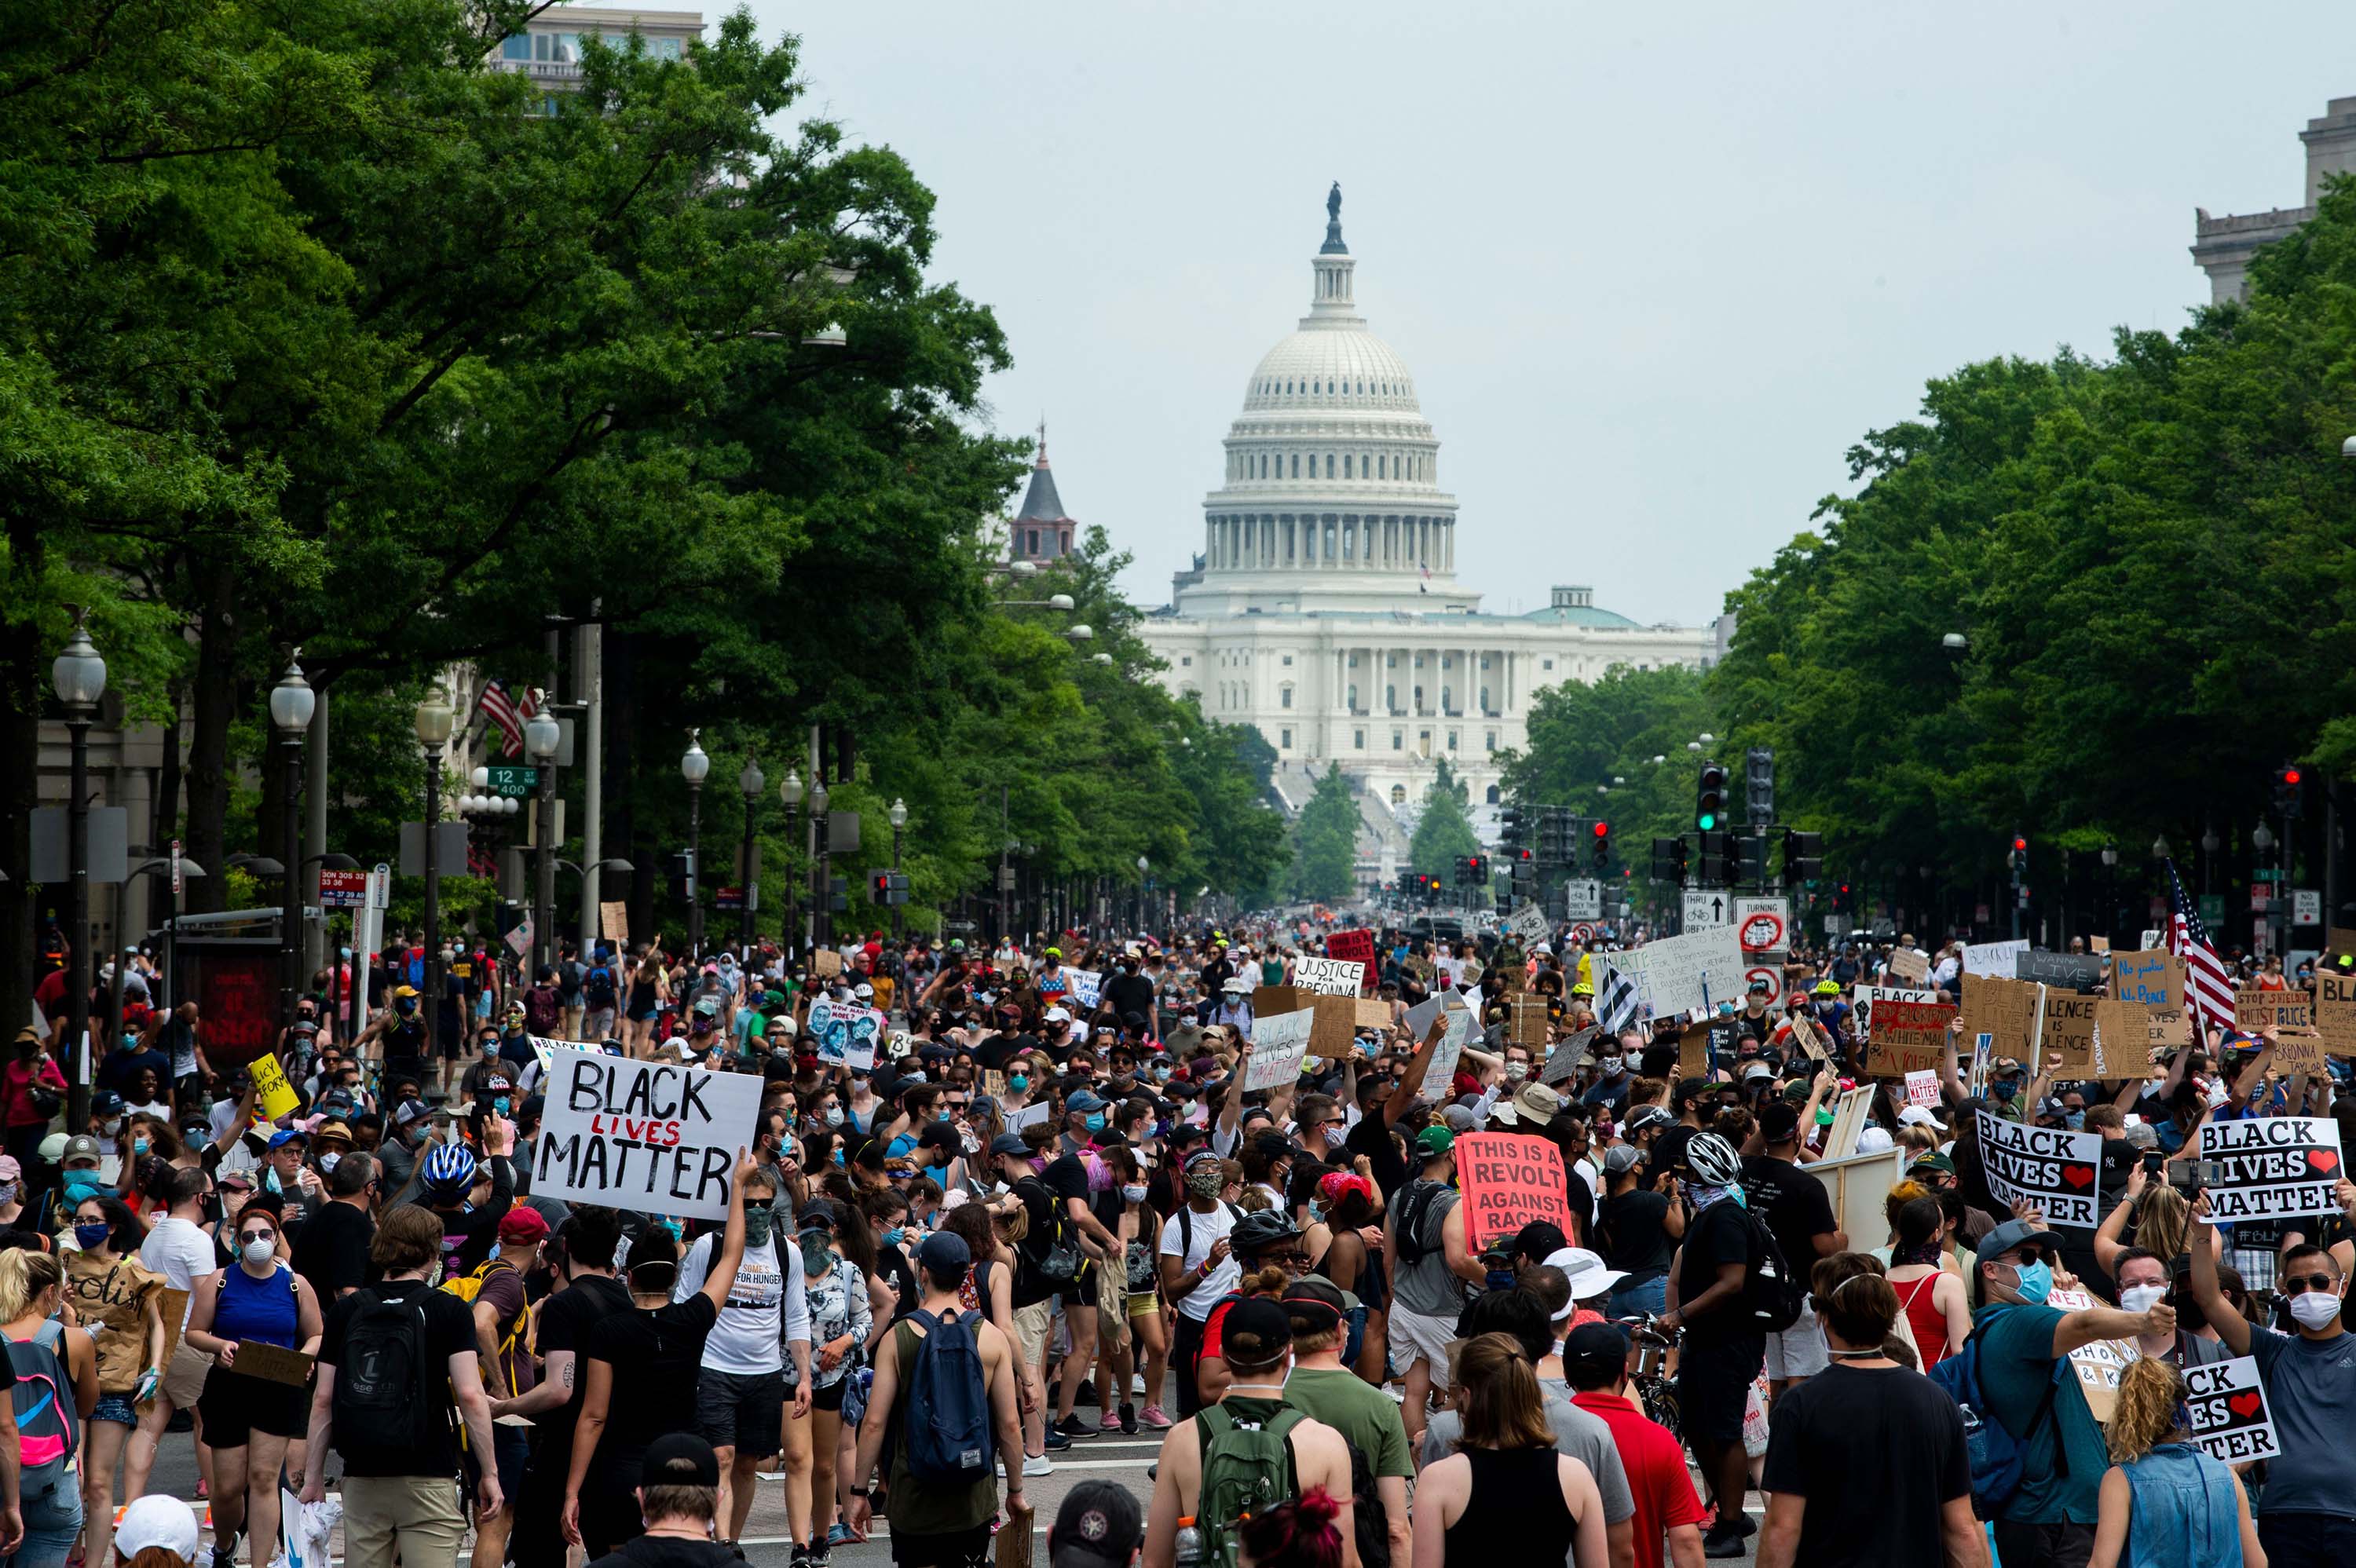 A crowd of protesters marches from the Capitol to the White House during a protest against police brutality and racism, on June 6, in Washington, DC.